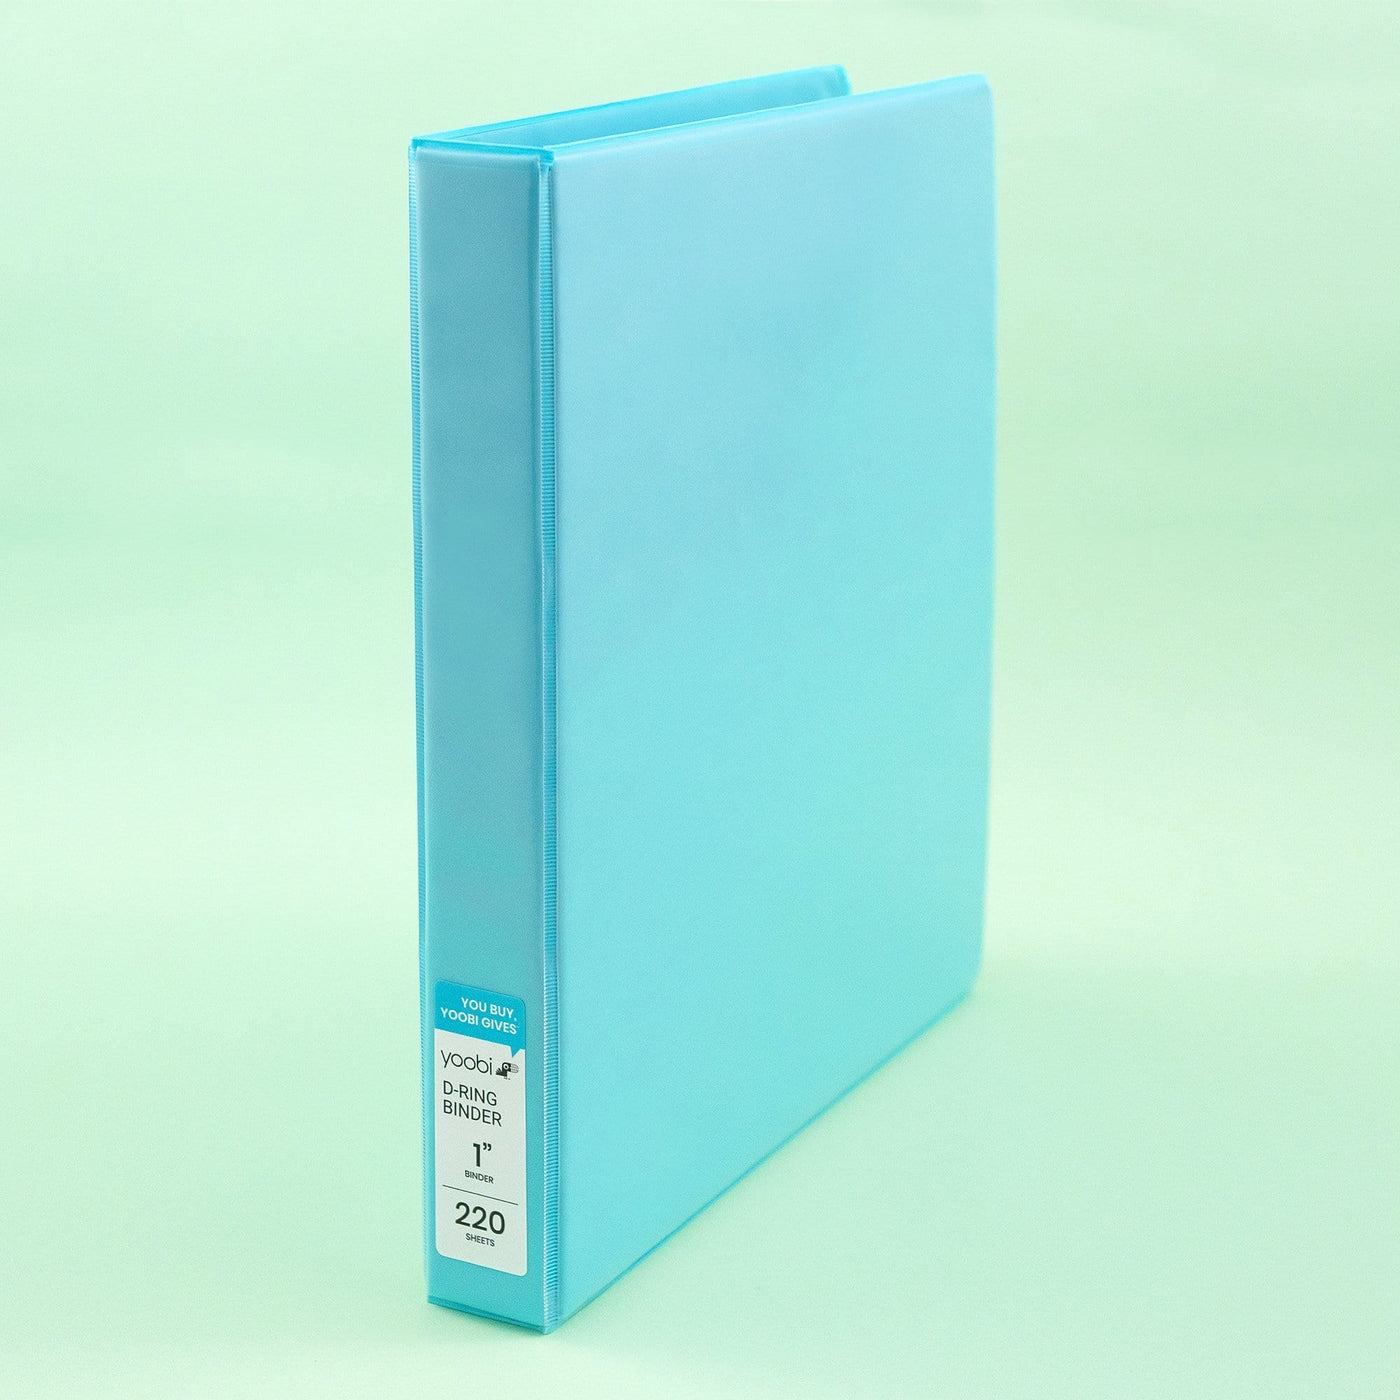 mint 1-inch, 3-ring binder standing upright